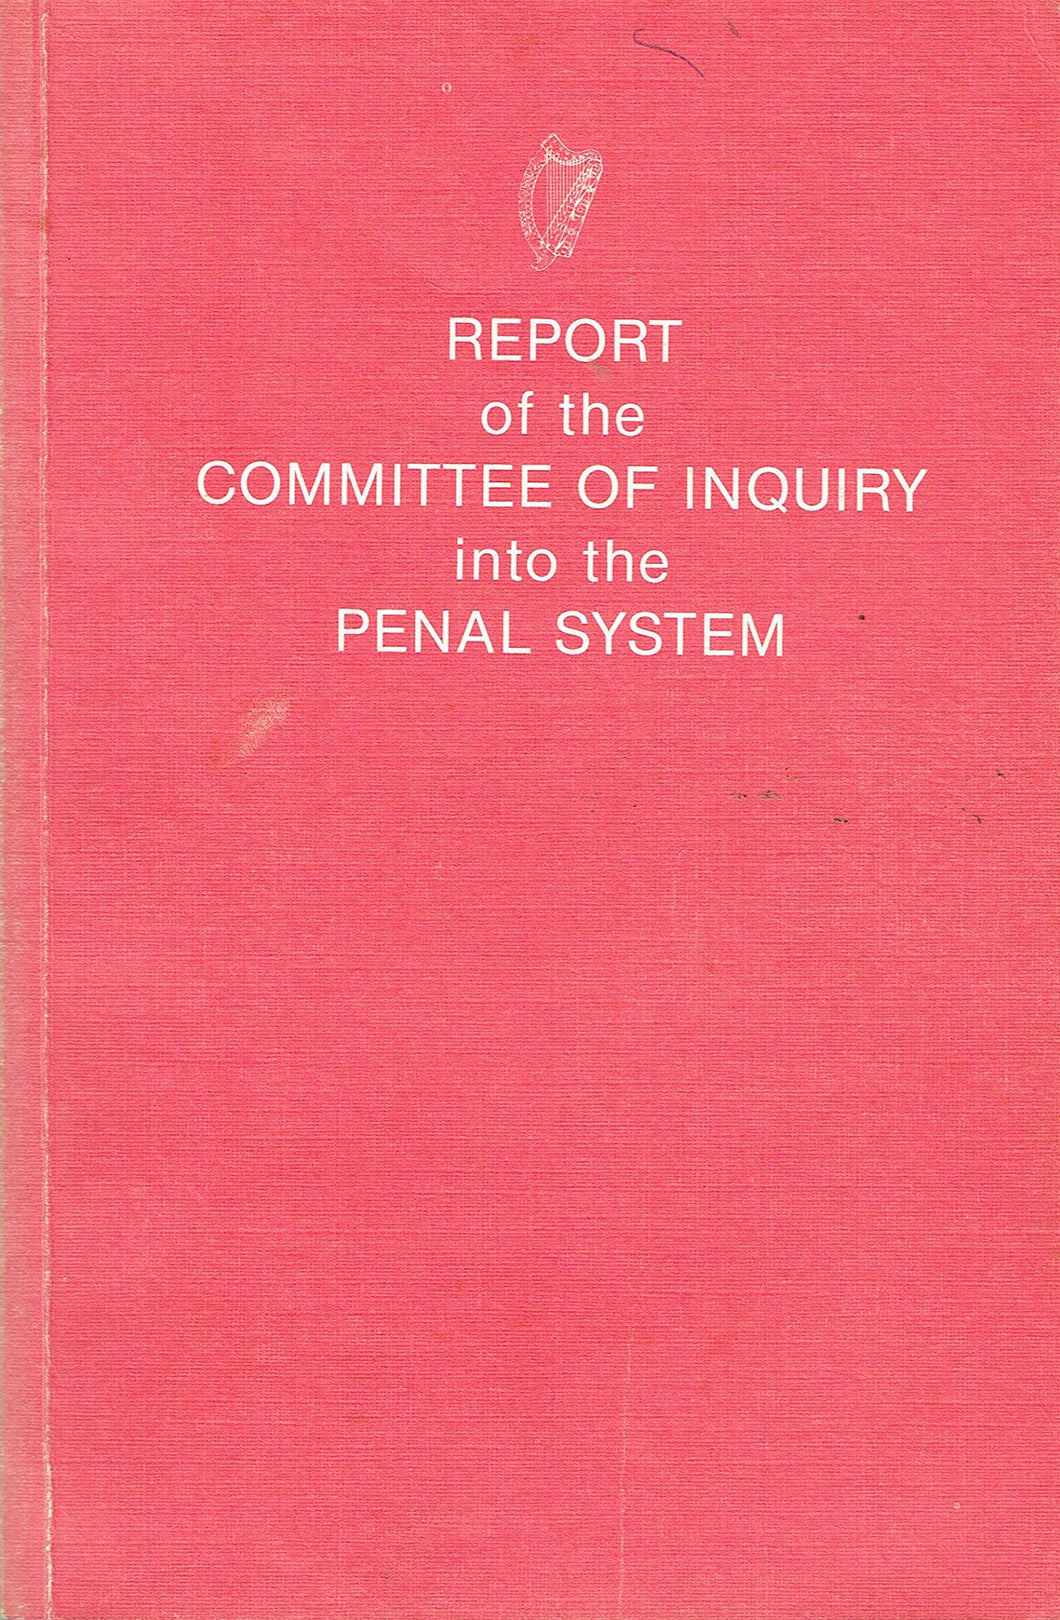 Report of the Committee of Inquiry into the Penal System